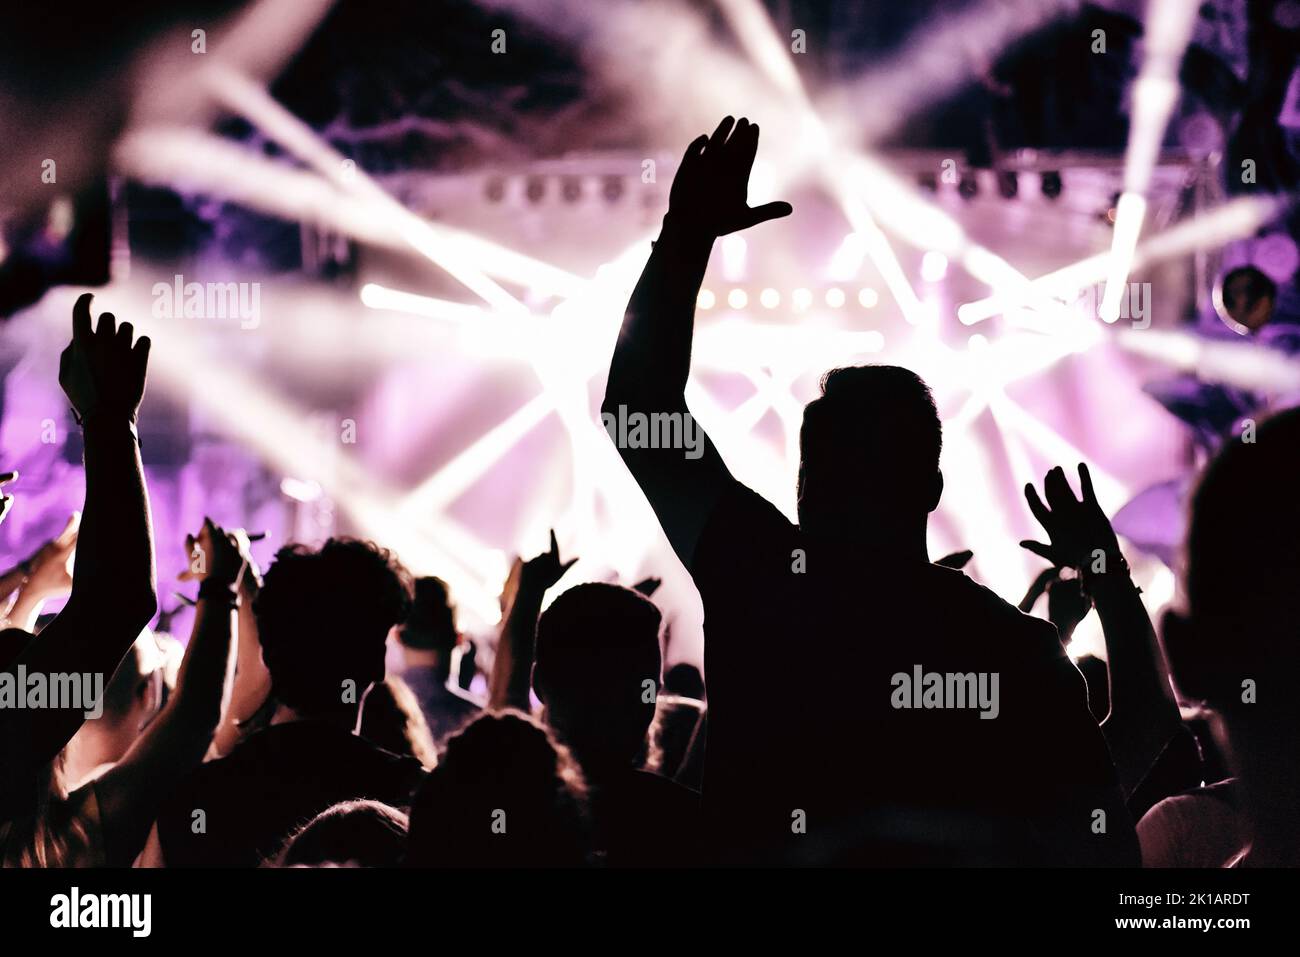 Concert crowd with raised arms applauding at a music festival Stock Photo